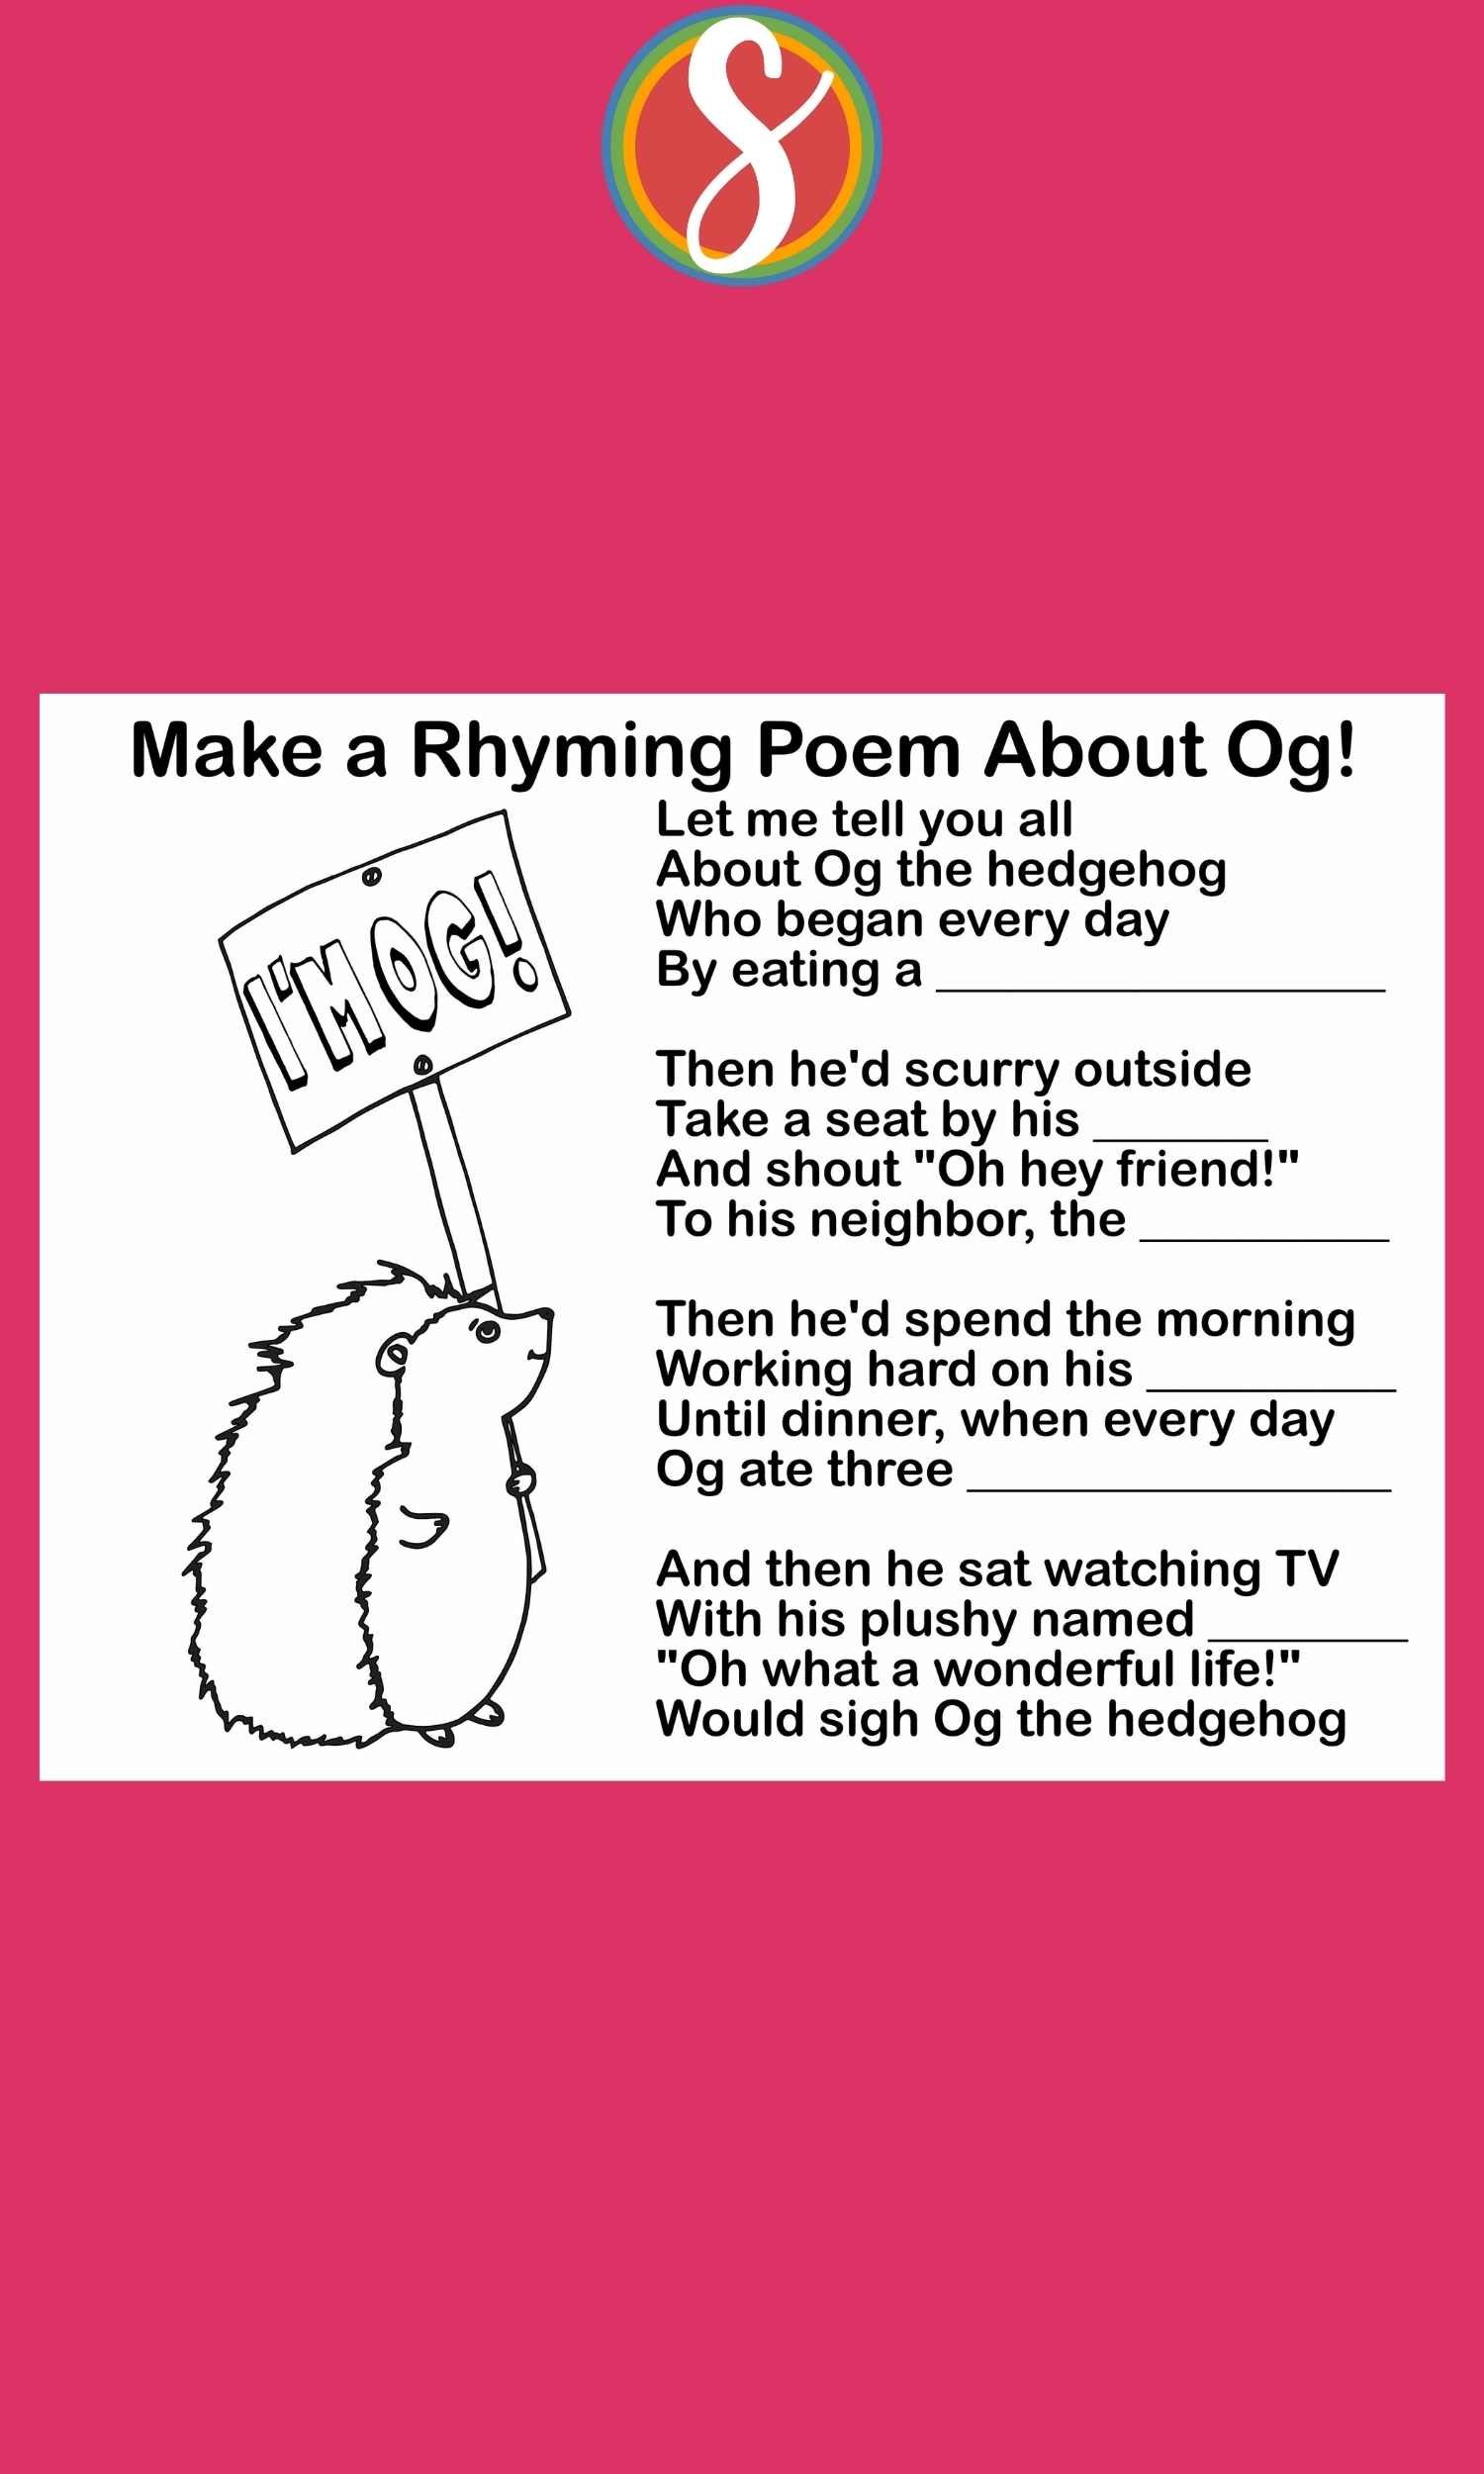 Hedgehog coloring page with a write your own poem activity